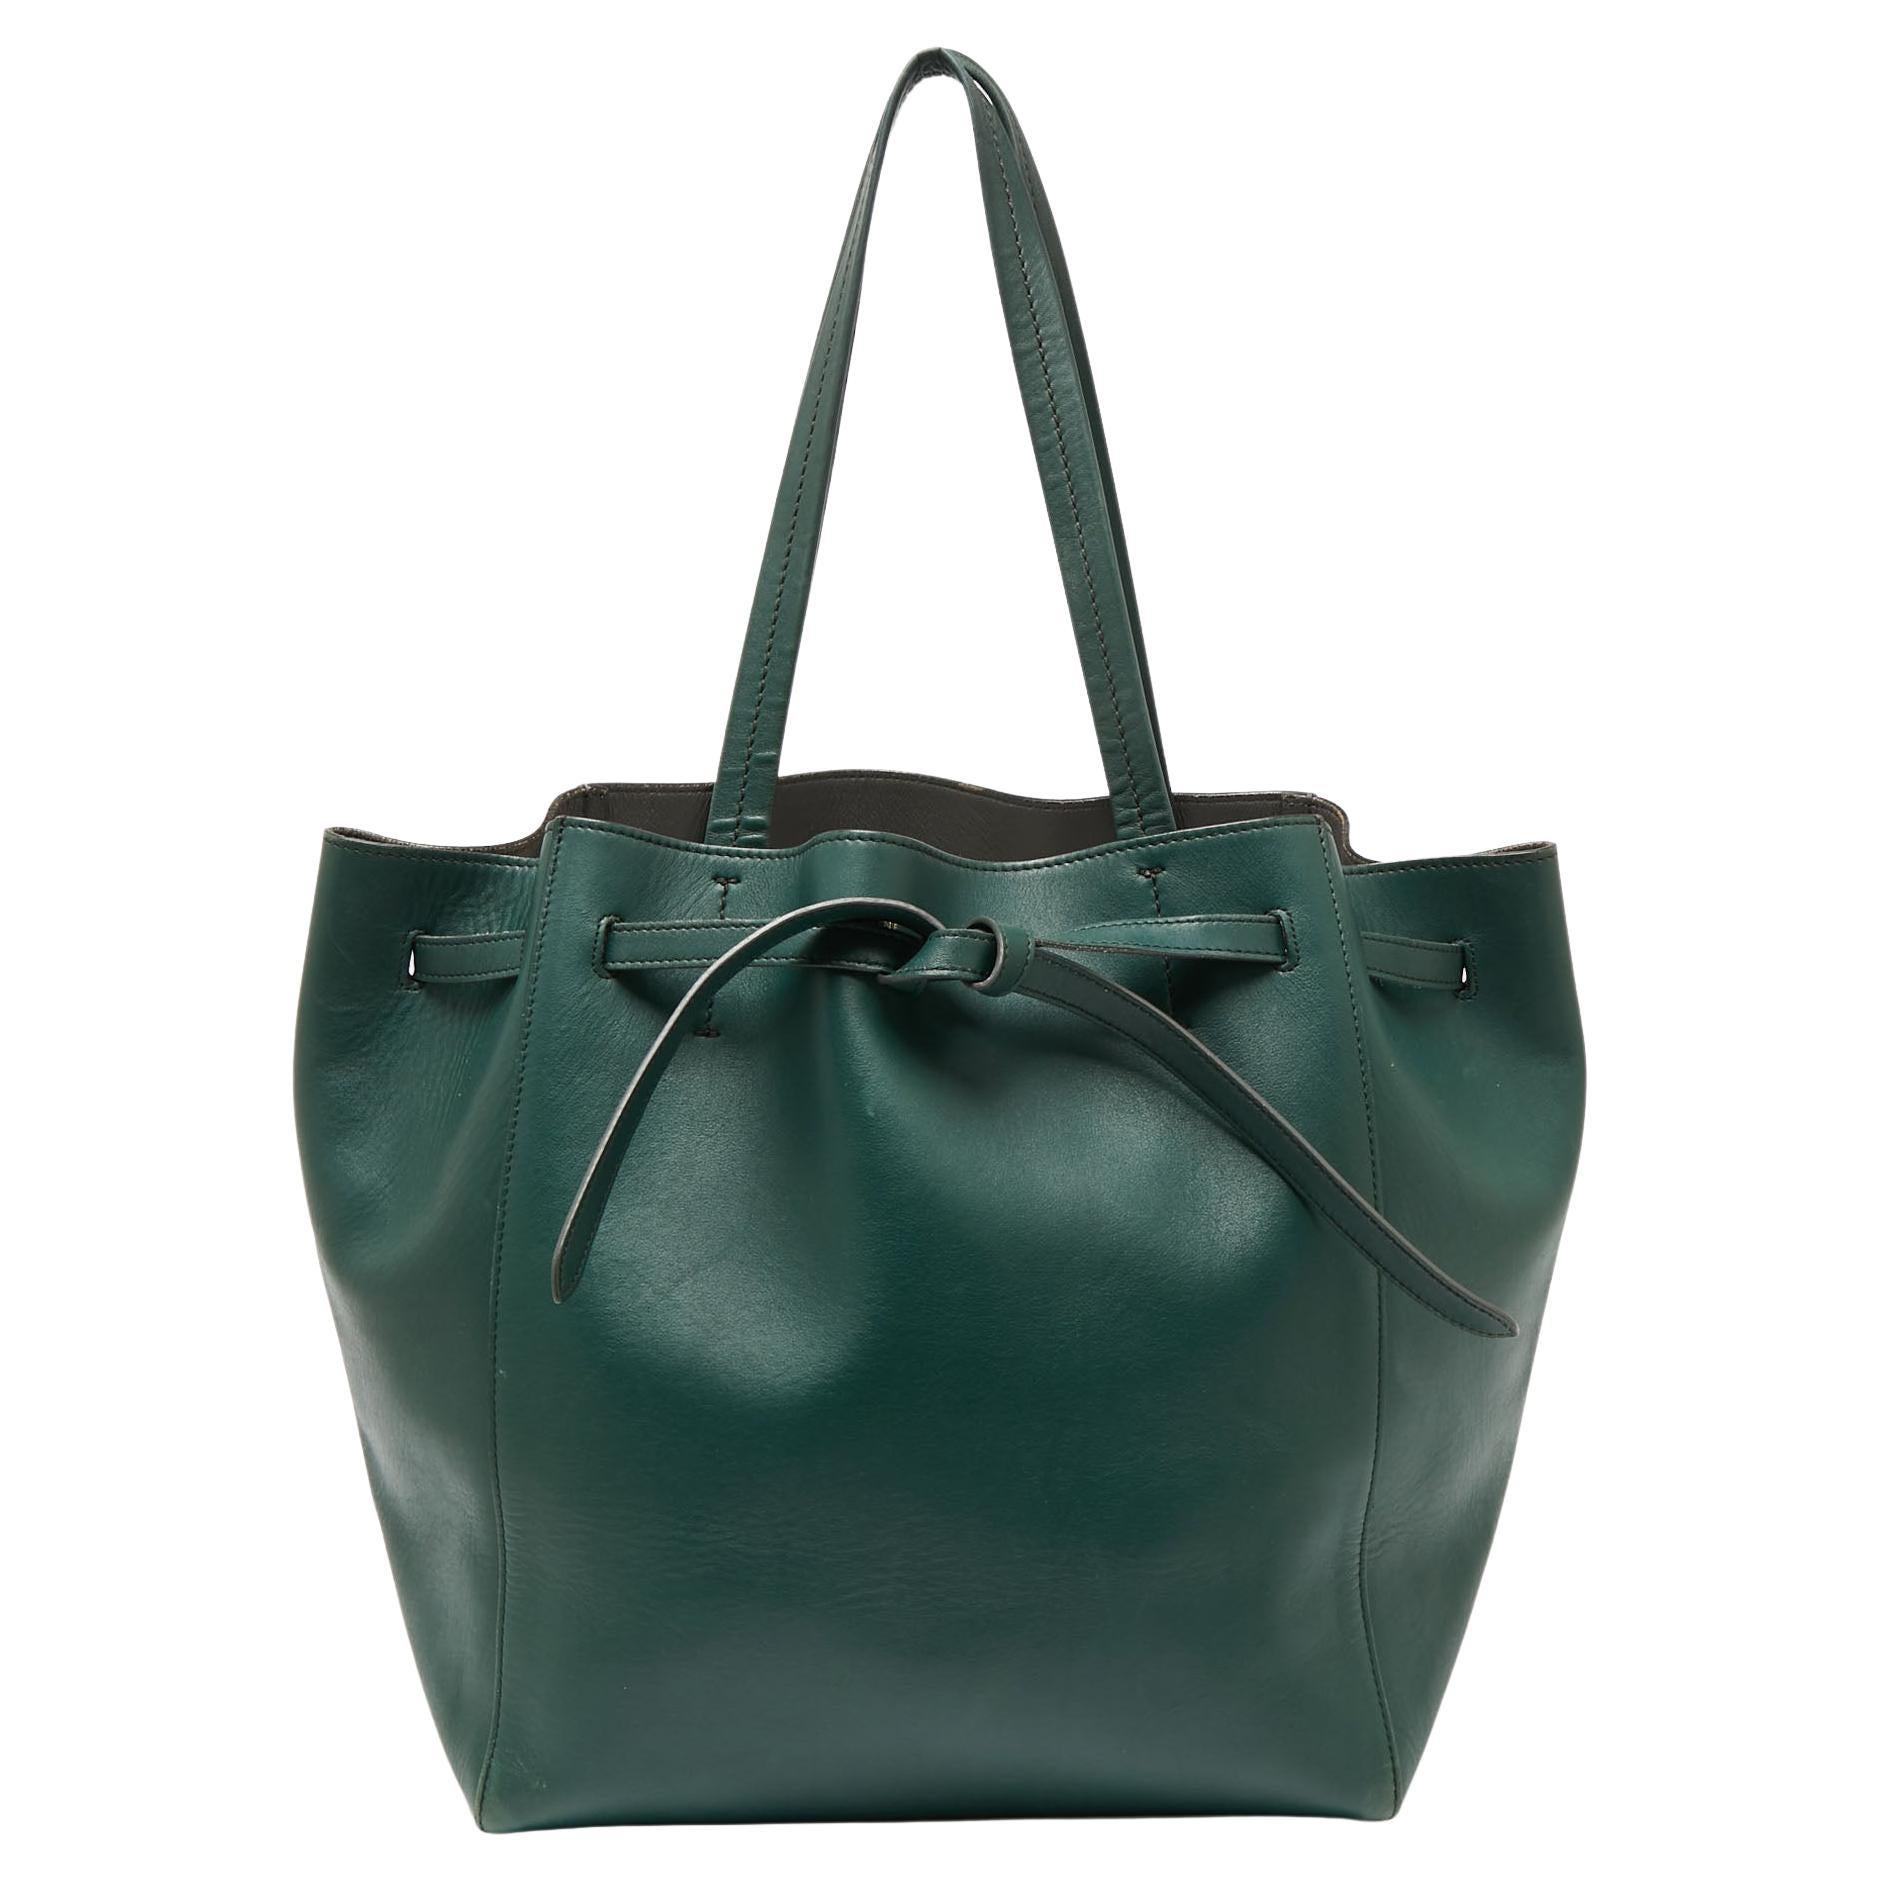 Celine Green Leather Small Cabas Phantom Tote